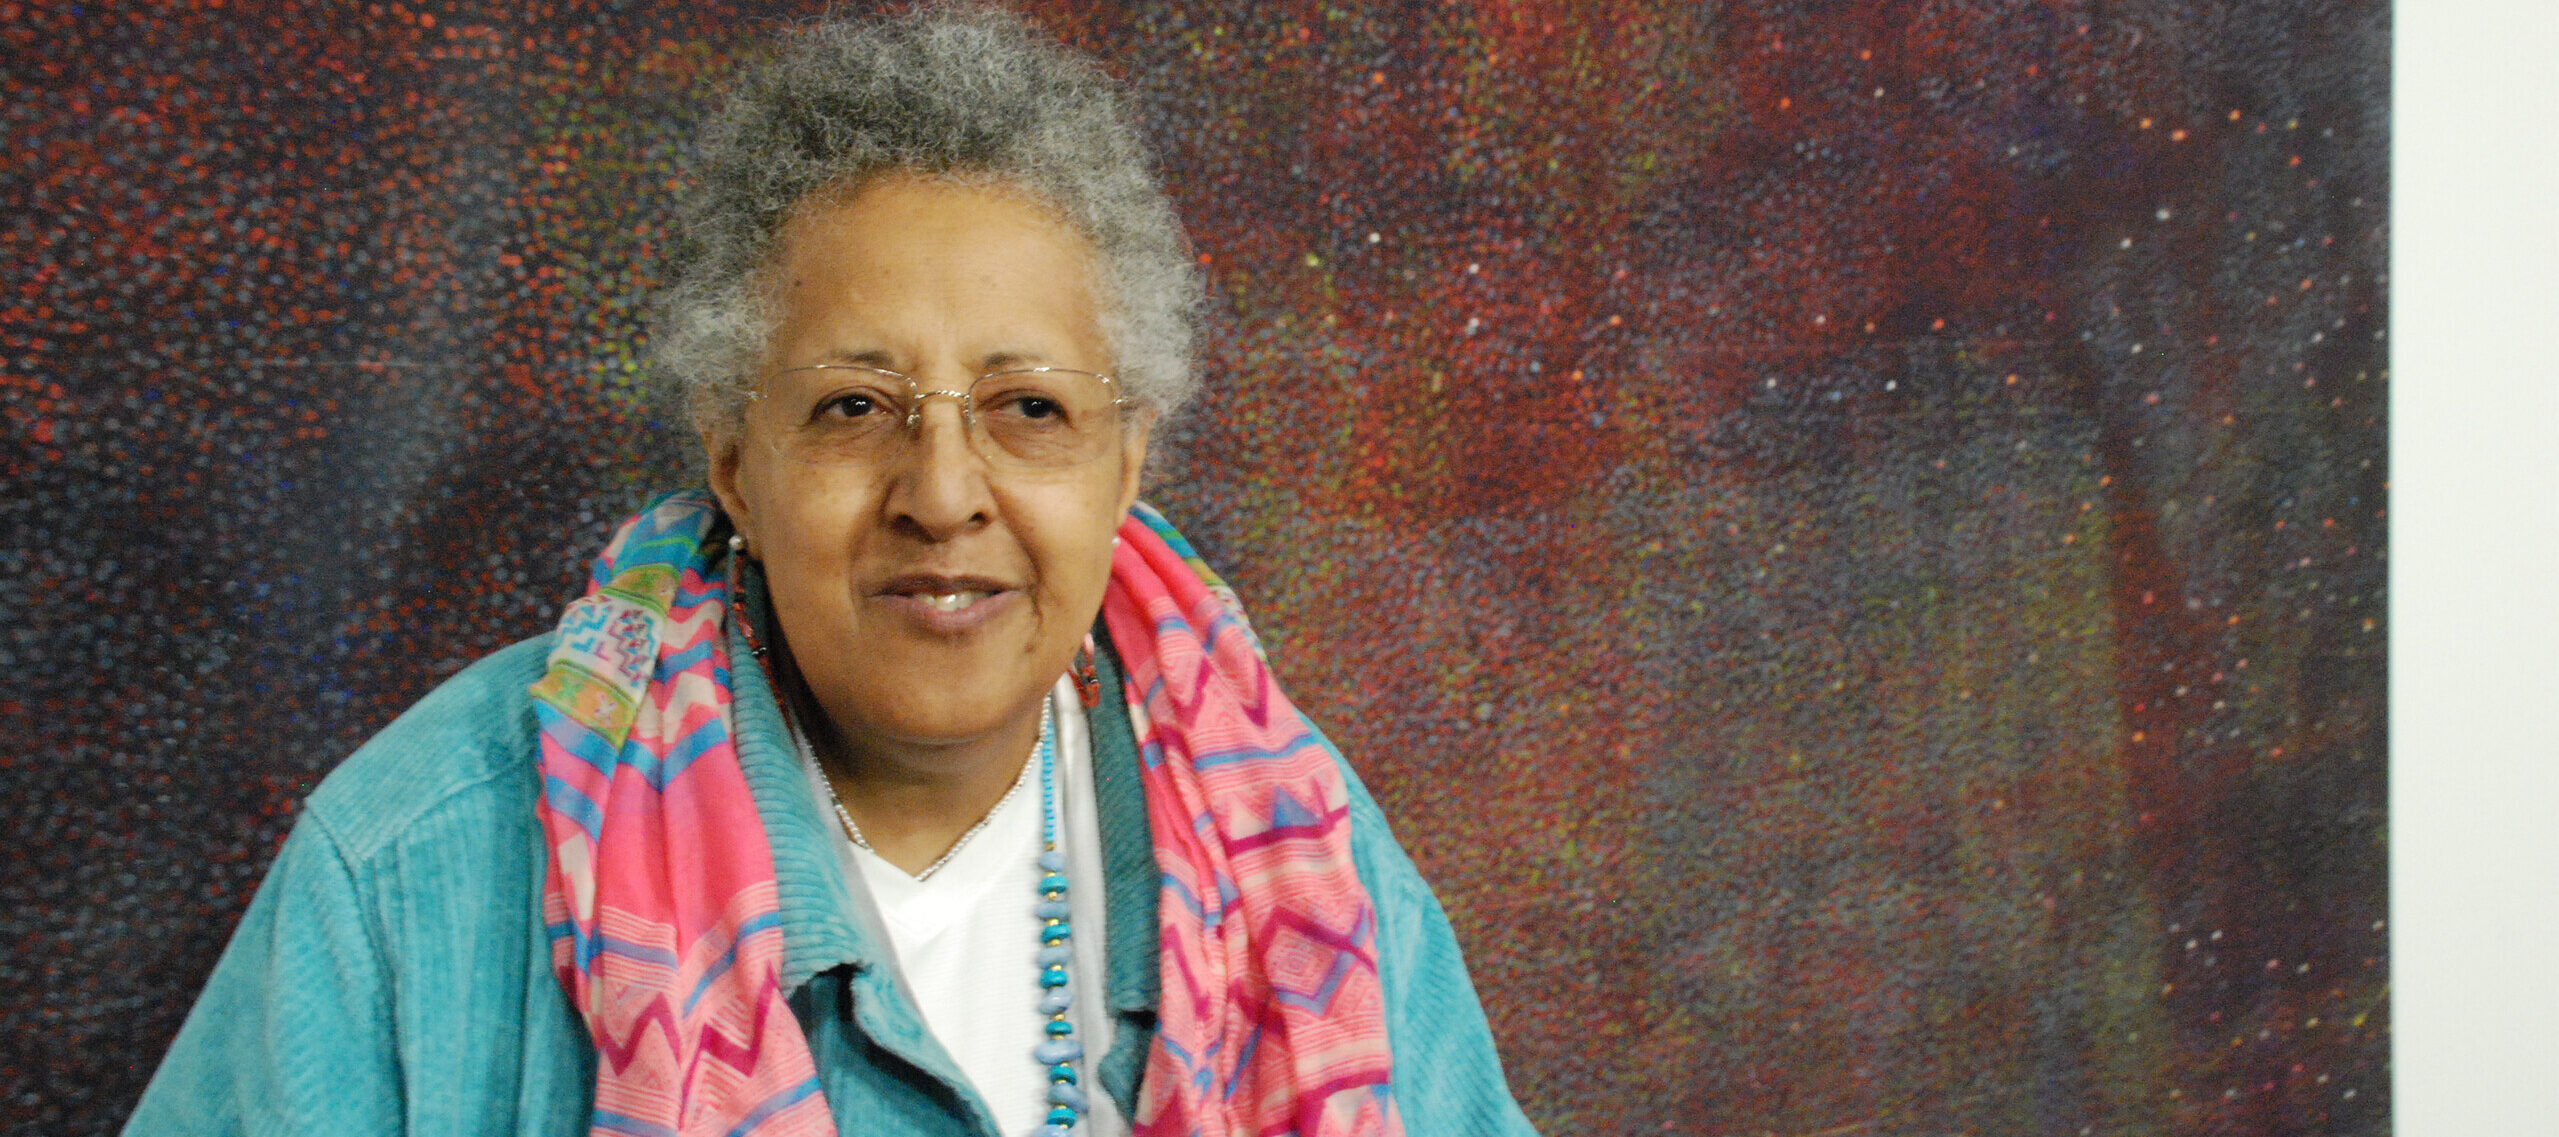 An older woman with medium-dark skin tone smiles slightly while standing in front of an abstract painting. She wears a colorful scarf atop a light-blue corduroy jacket.